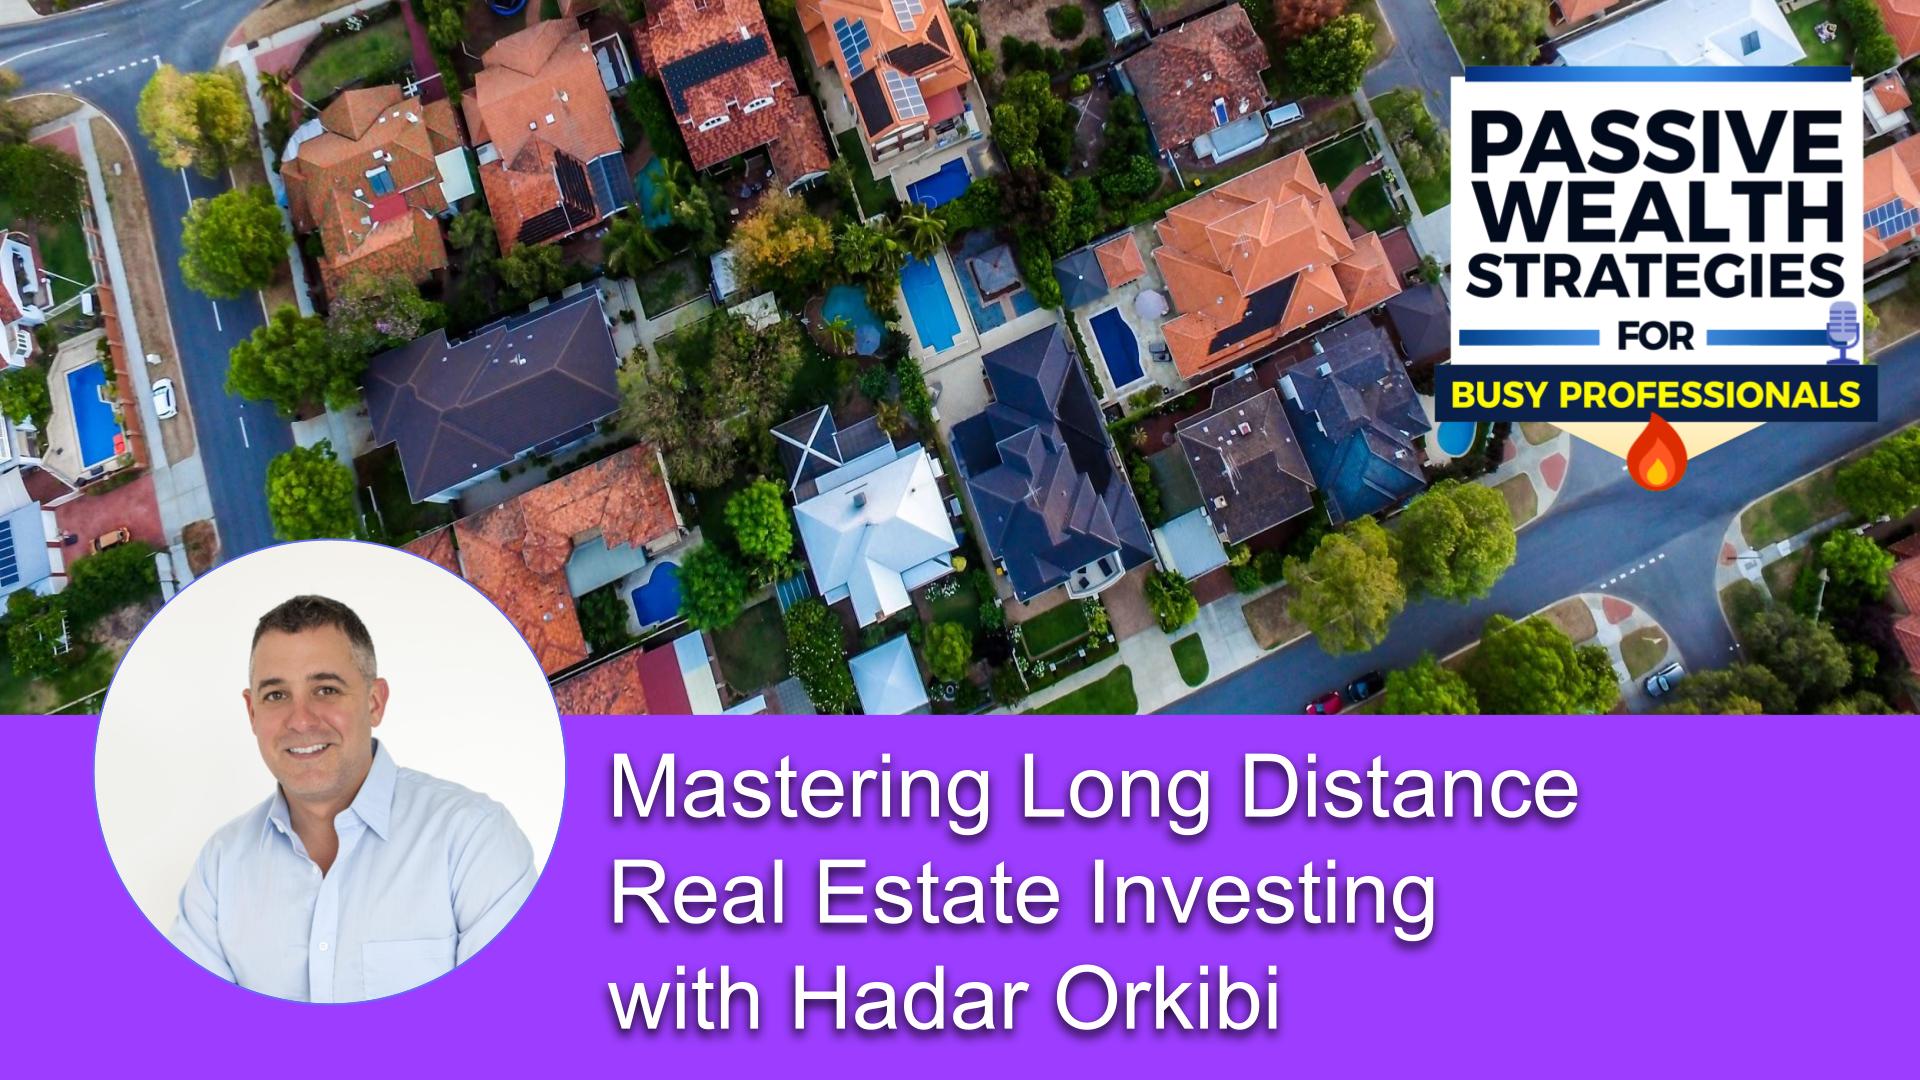 188 Mastering Long Distance Real Estate Investing with Hadar Orkibi